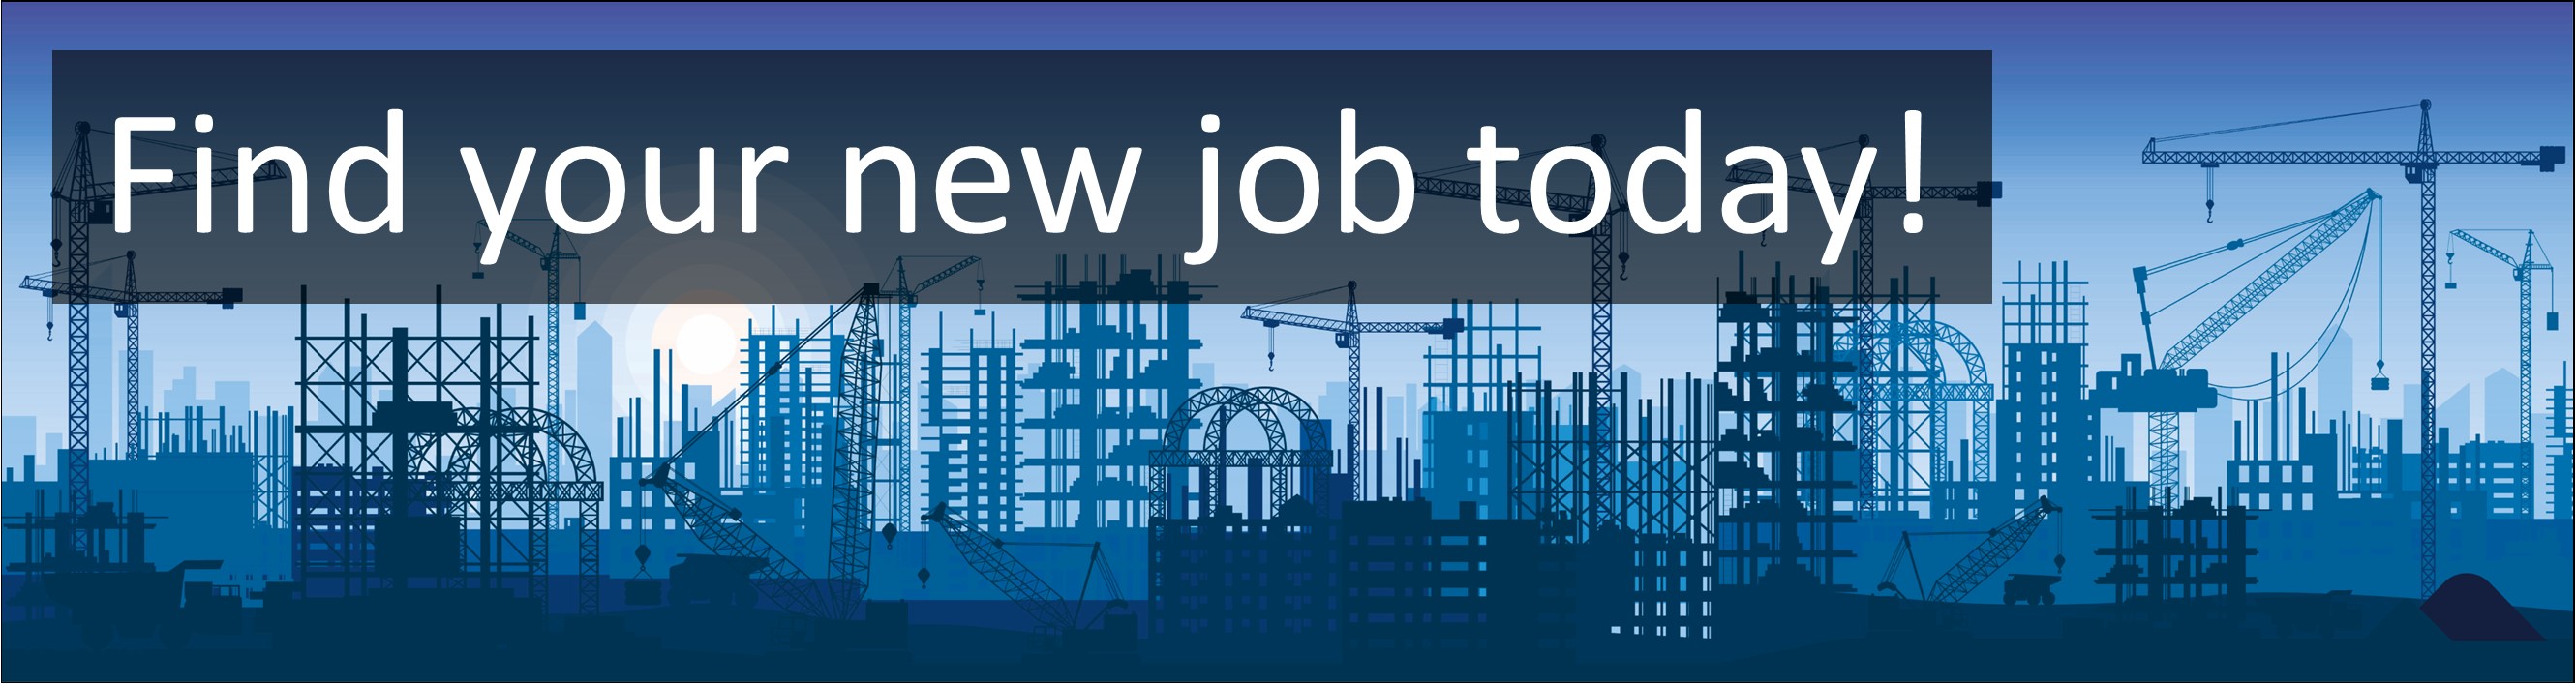 Construction & Trades Jobs. Slinger / Signaller Jobs, Careers & Vacancies in Stroud, Gloucestershire Advertised by AWD online – Multi-Job Board Advertising and CV Sourcing Recruitment Services